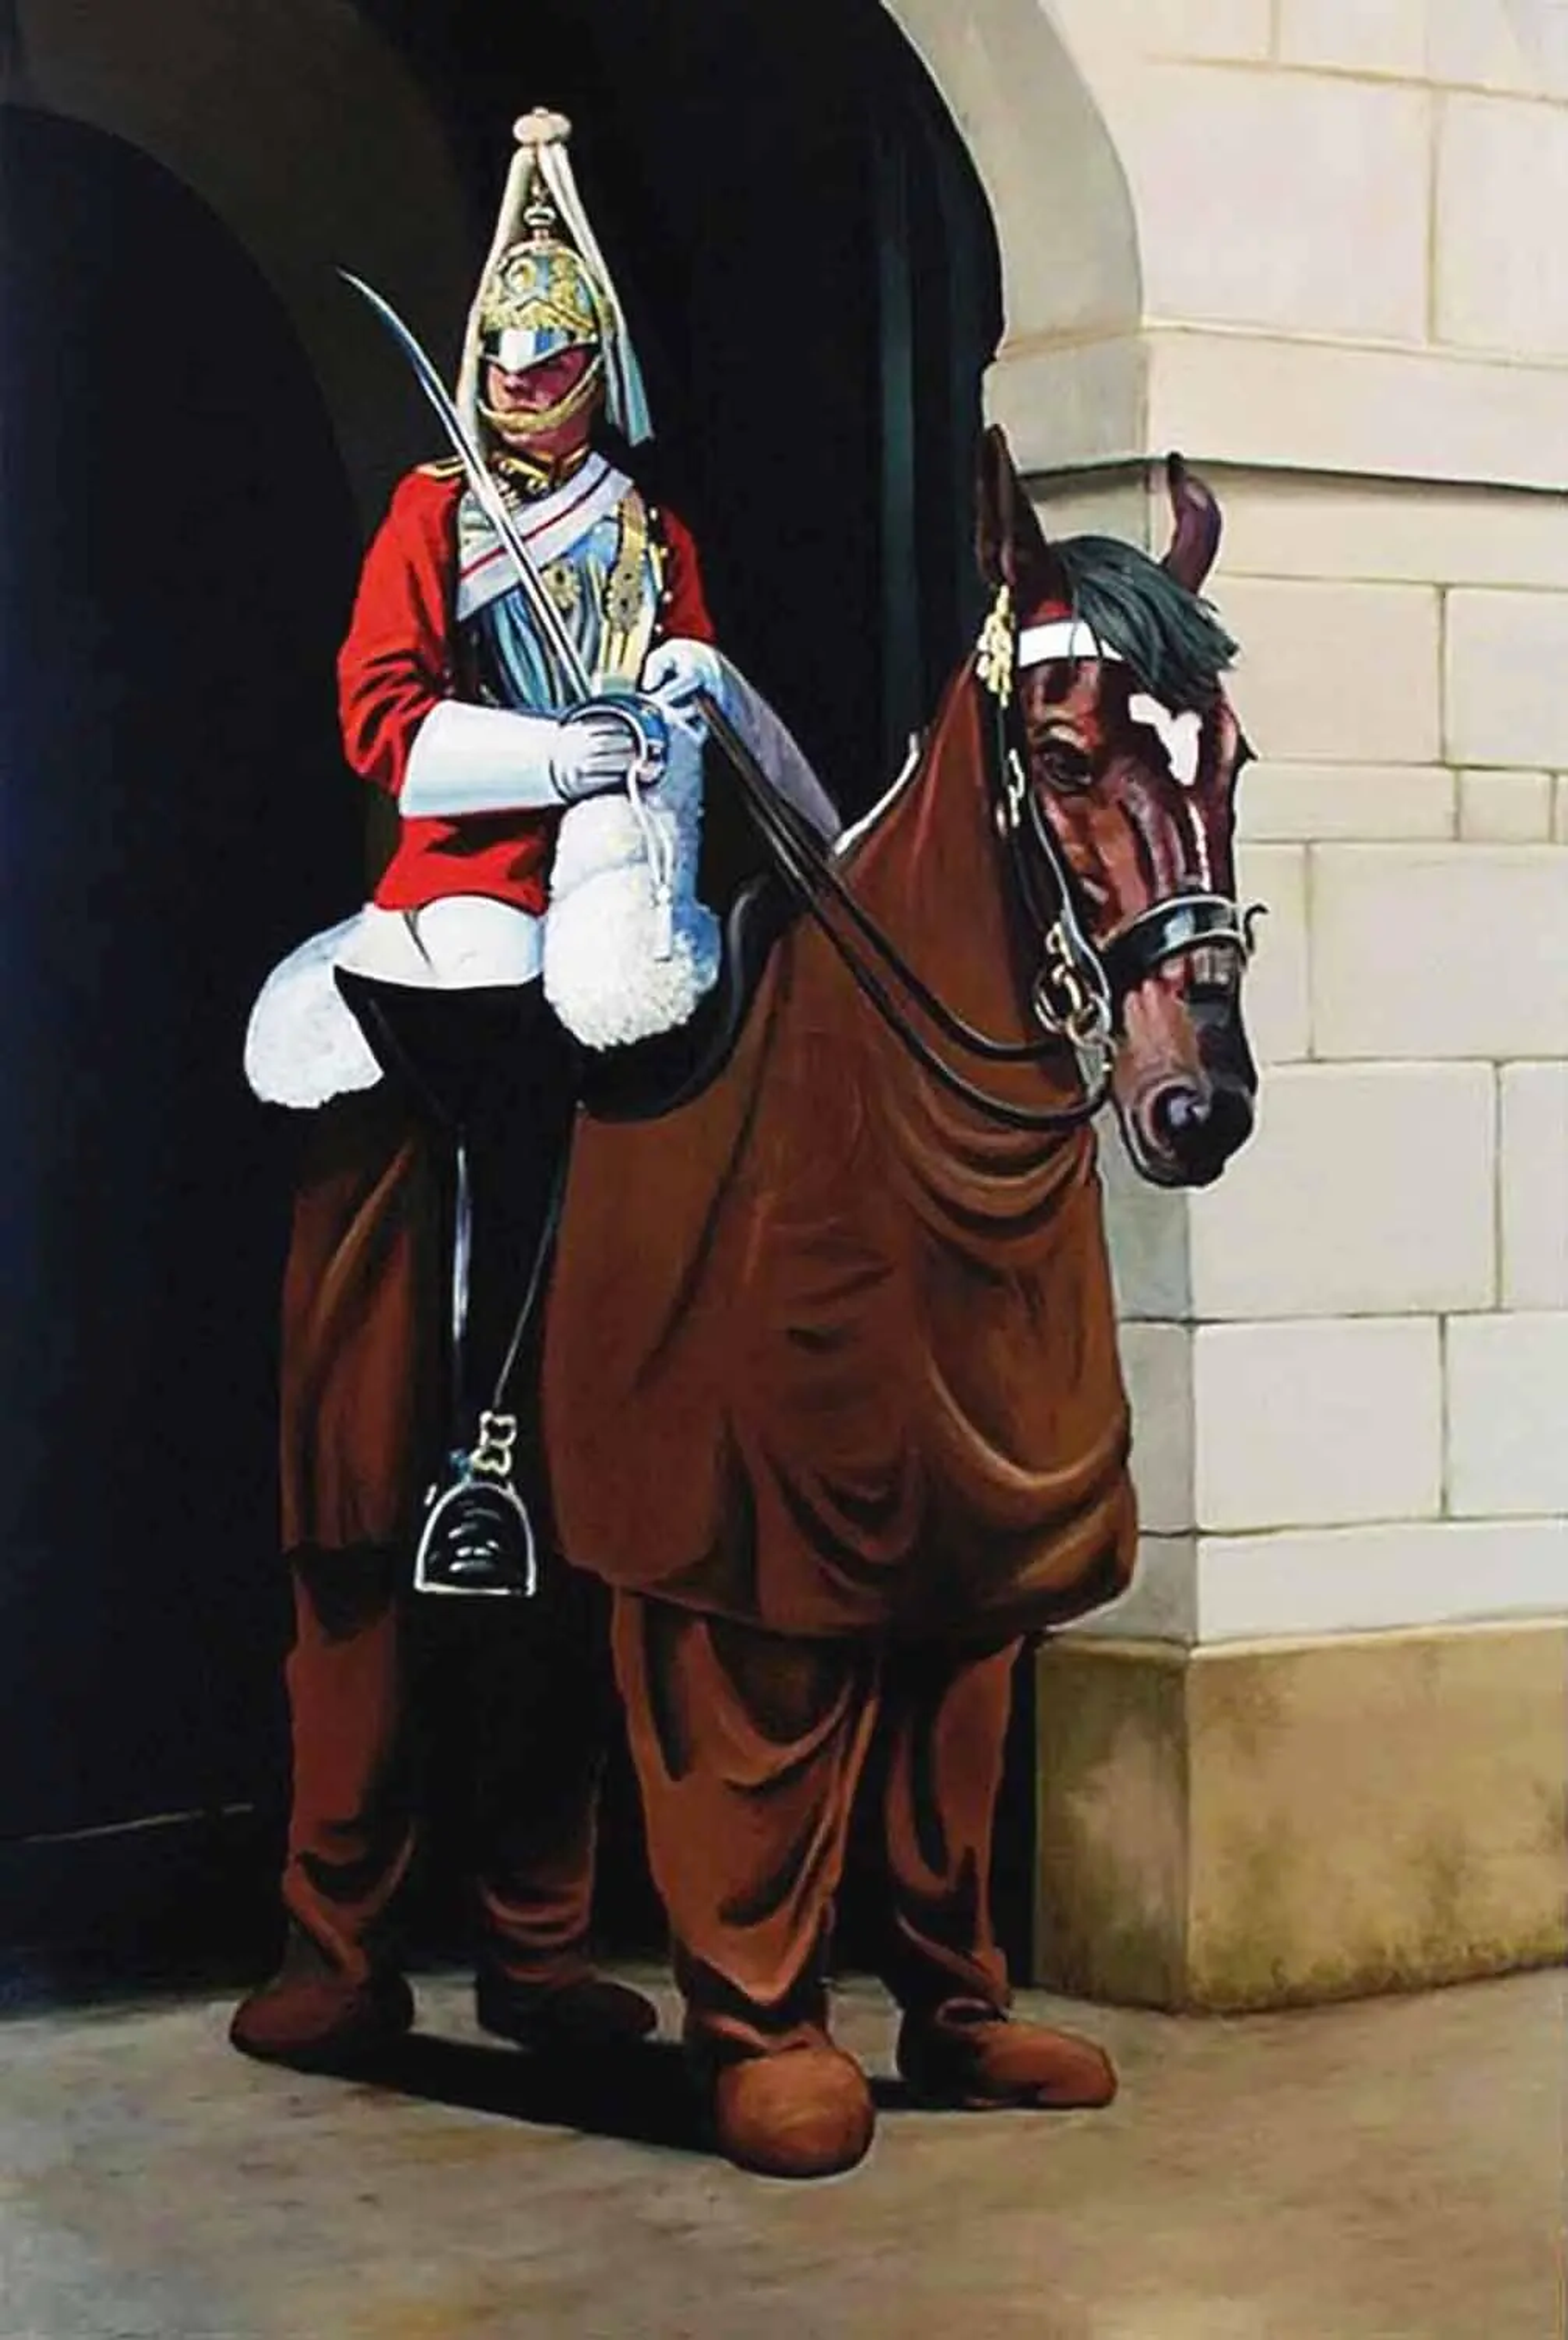 This painting by Banksy shows a uniformed army officer mounted on a pantomime horse.